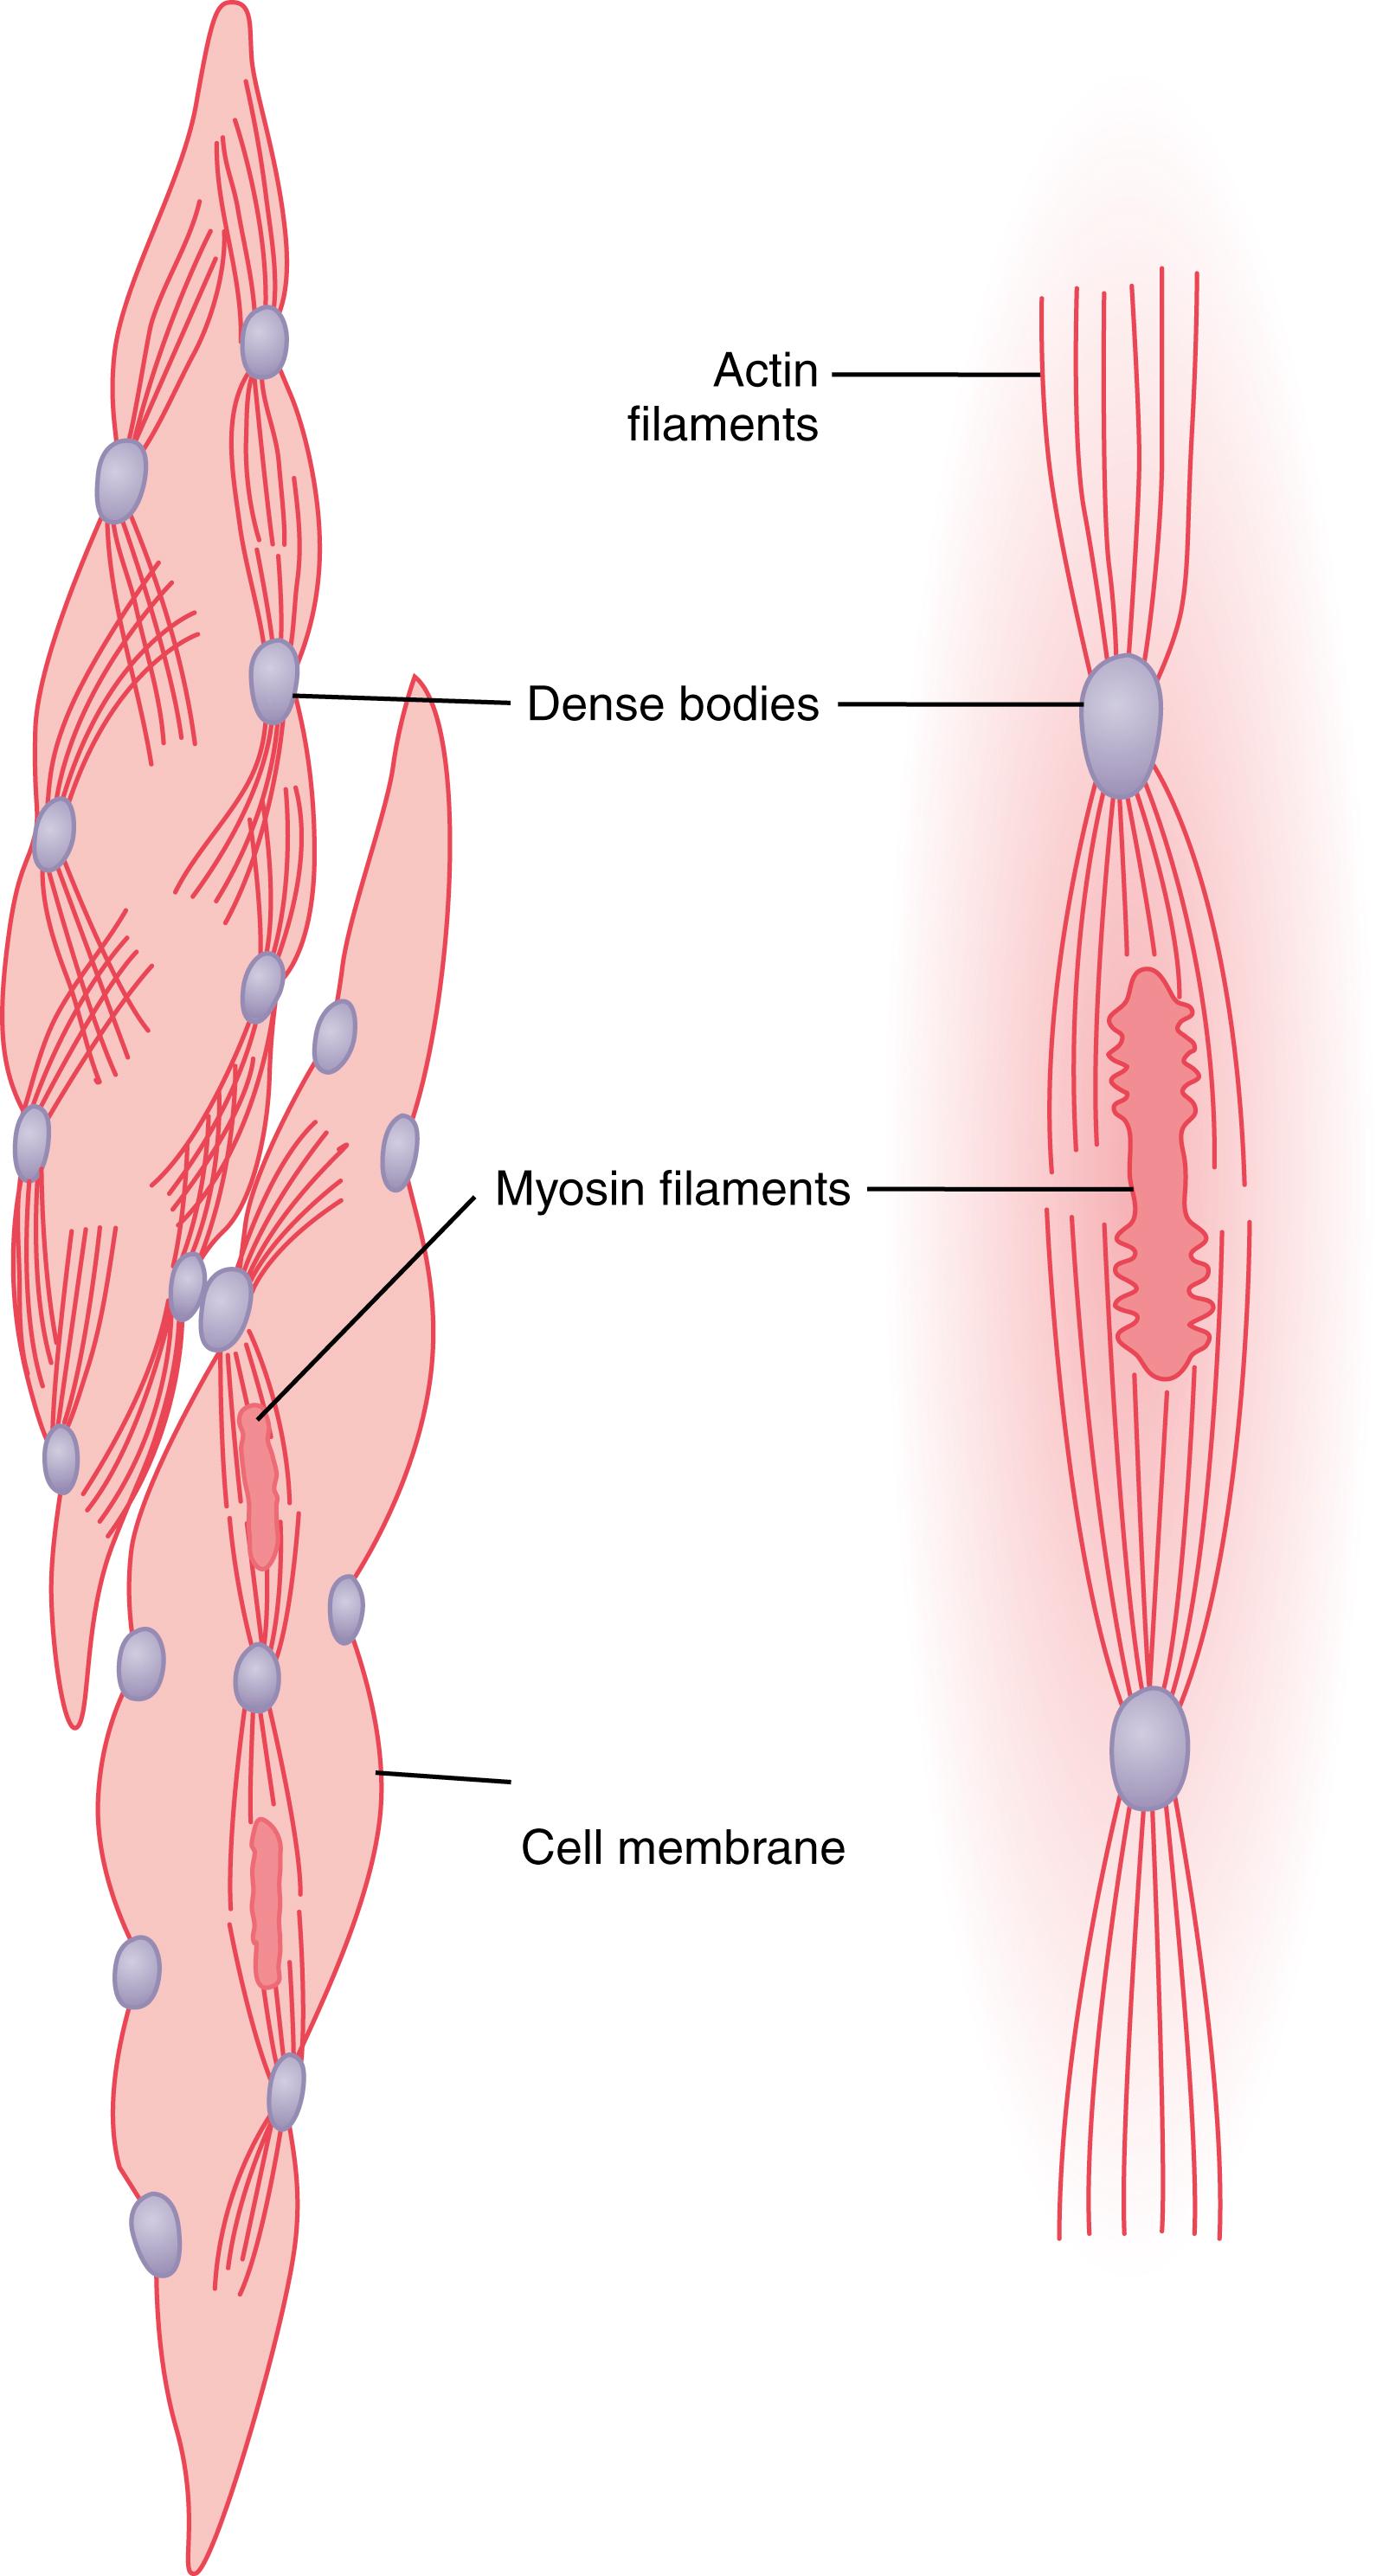 Figure 8-2, Physical structure of smooth muscle. The fiber on the upper left shows actin filaments radiating from dense bodies. The fiber on the lower left and at right demonstrate the relation of myosin filaments to actin filaments.